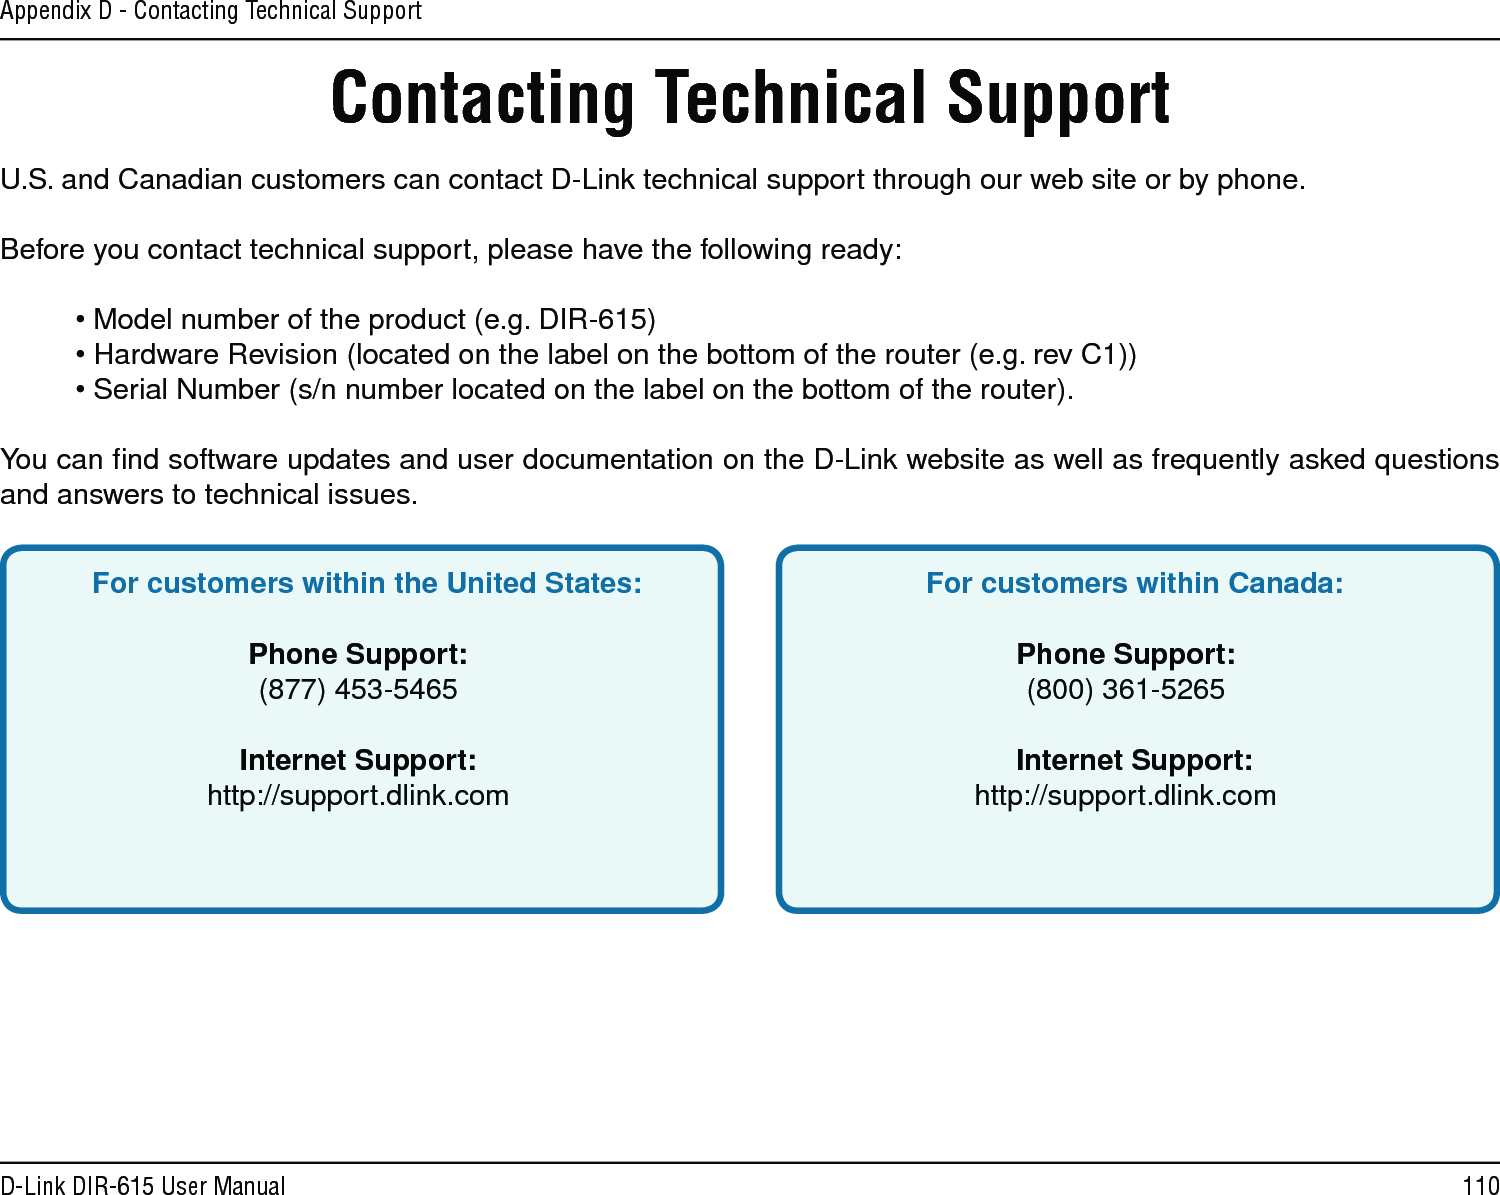 110D-Link DIR-615 User ManualAppendix D - Contacting Technical SupportContacting Technical SupportU.S. and Canadian customers can contact D-Link technical support through our web site or by phone.Before you contact technical support, please have the following ready:  • Model number of the product (e.g. DIR-615)  • Hardware Revision (located on the label on the bottom of the router (e.g. rev C1))  • Serial Number (s/n number located on the label on the bottom of the router). You can ﬁnd software updates and user documentation on the D-Link website as well as frequently asked questions and answers to technical issues.For customers within the United States: Phone Support:(877) 453-5465Internet Support:http://support.dlink.com For customers within Canada: Phone Support:(800) 361-5265 Internet Support:http://support.dlink.com